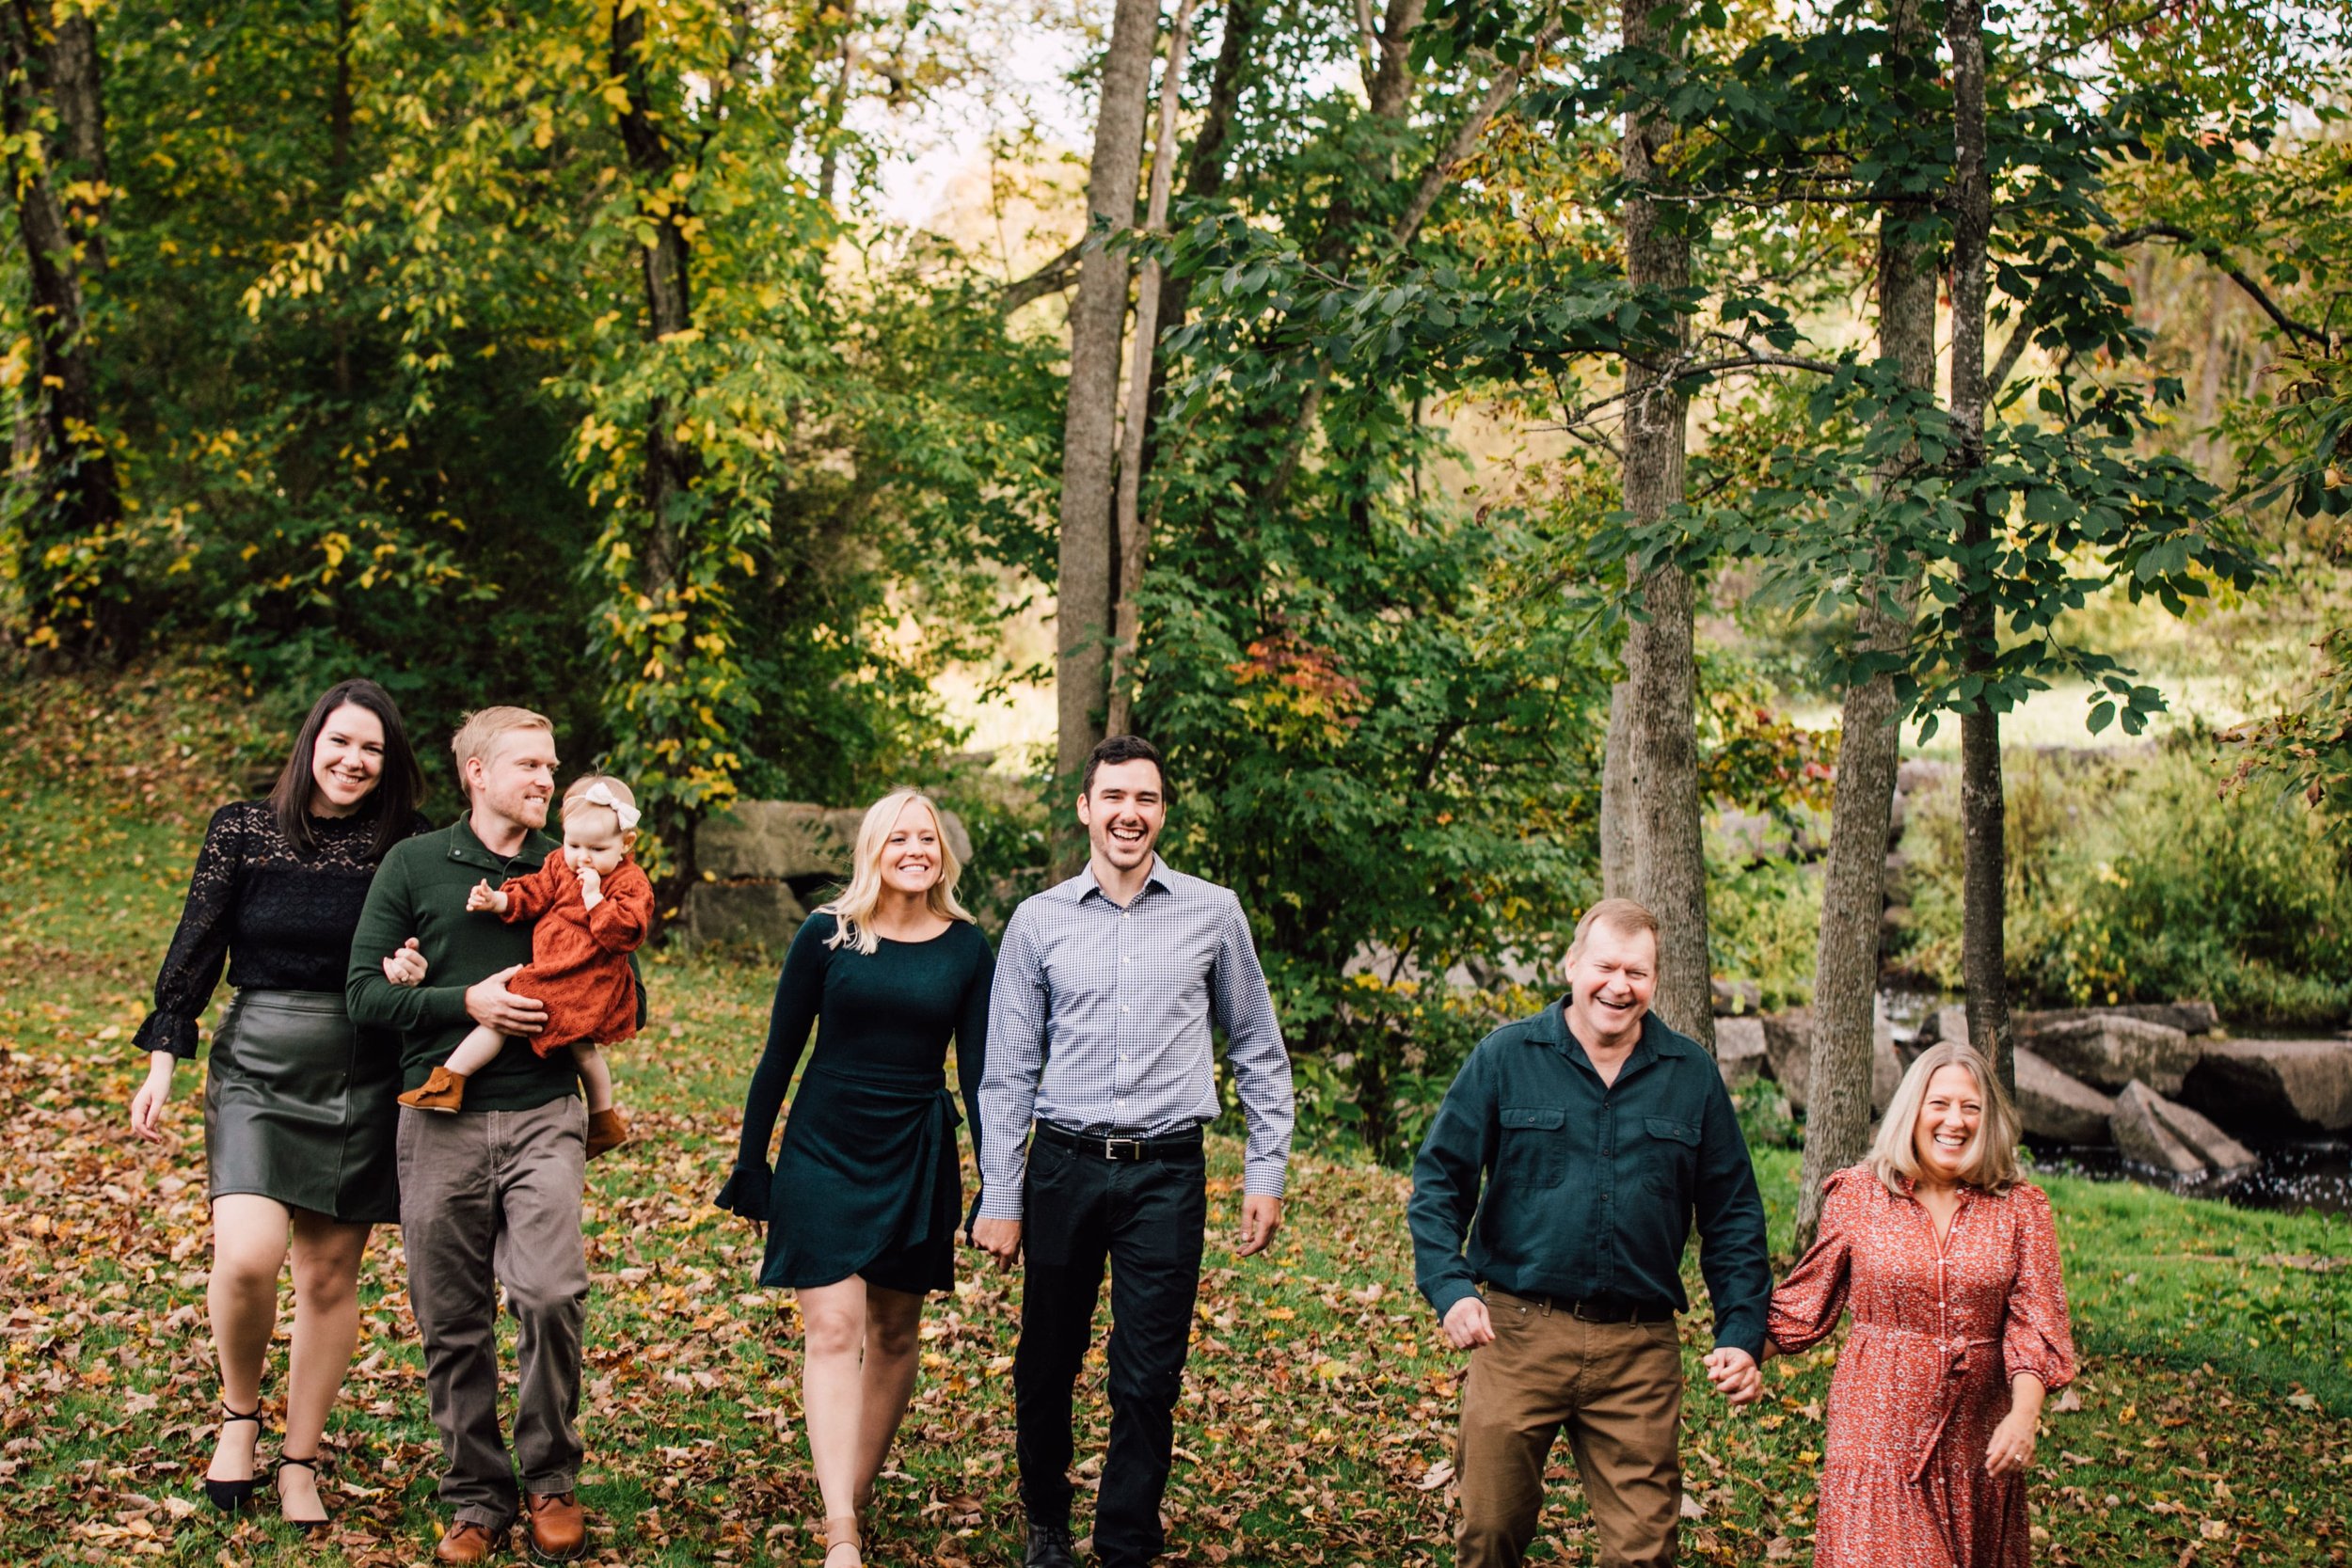  a cinematic photo of a family of 7 walking together while smiling in a wooded area as the colors change for fall family photos 